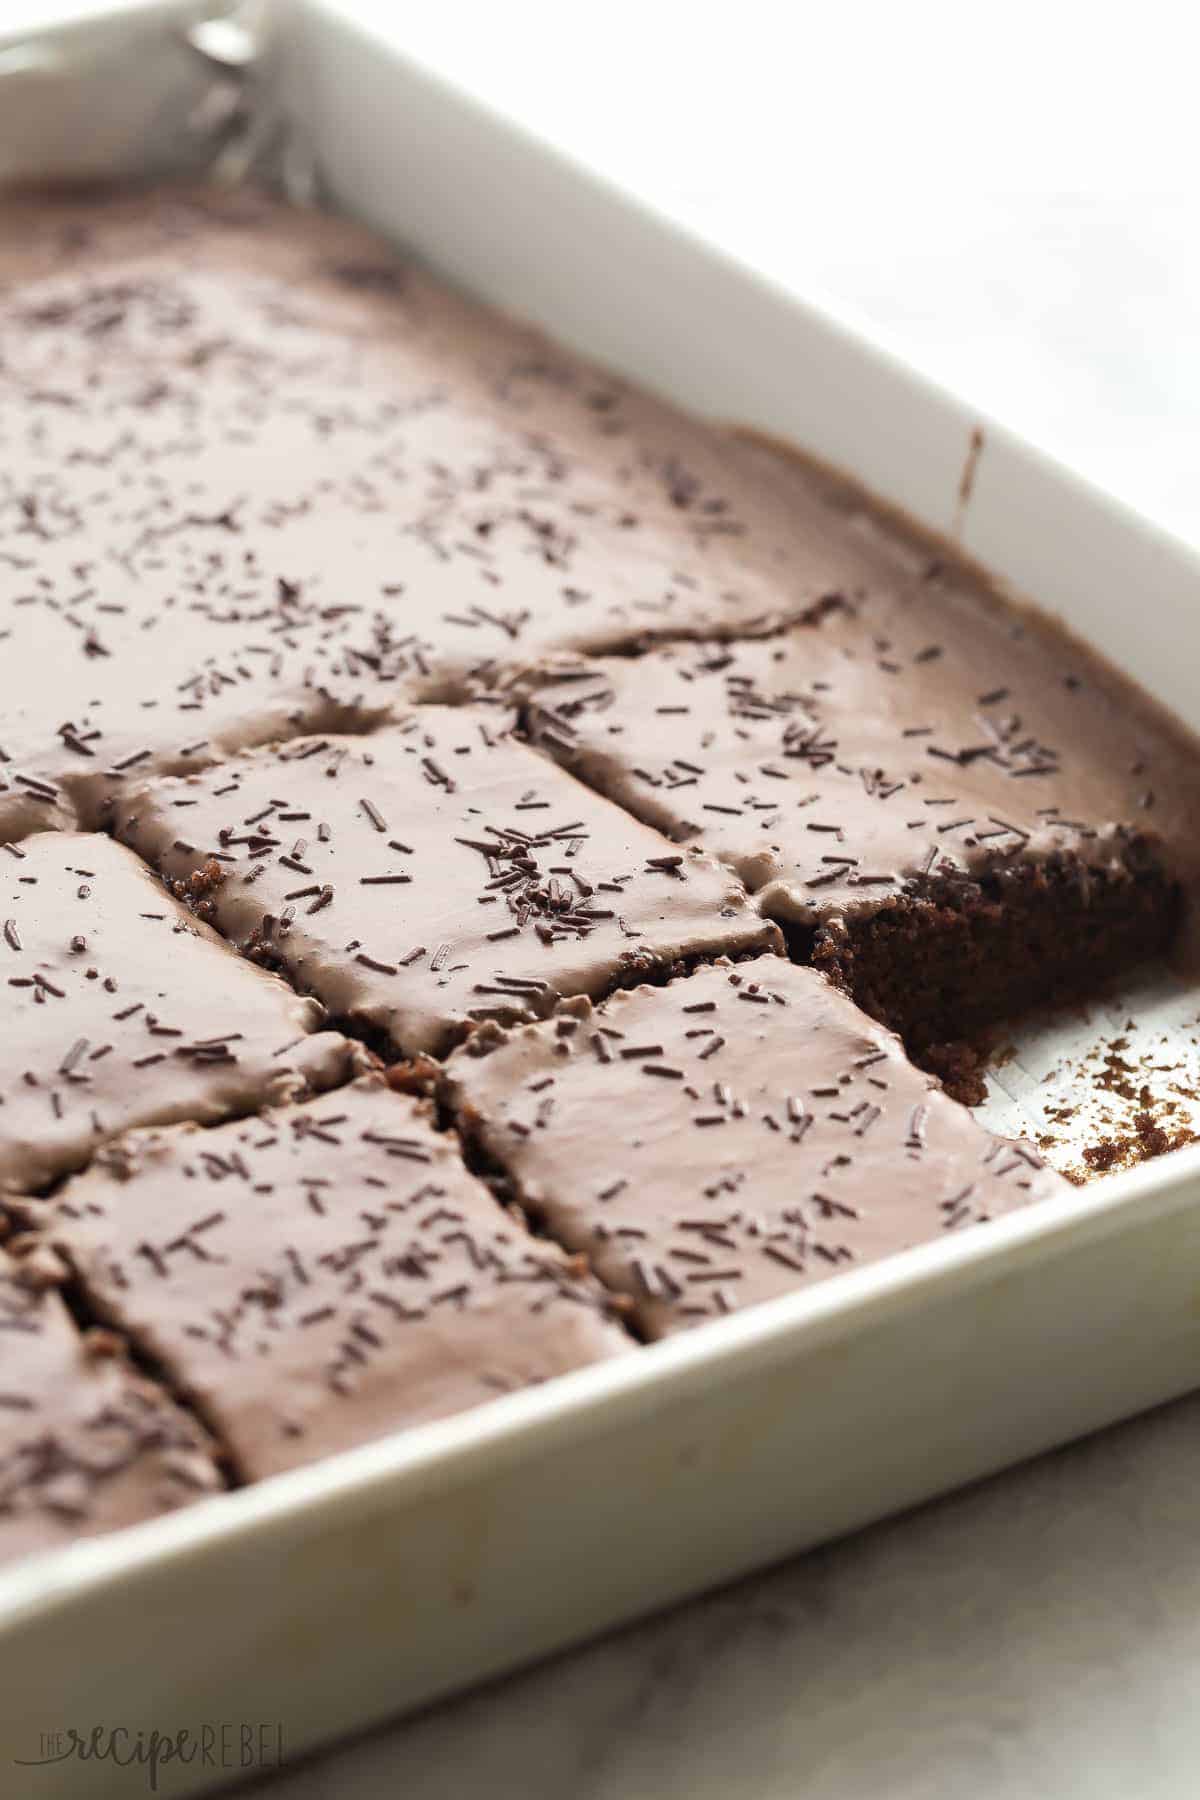 large sheet pan with texas brownies cut into squares and one square missing